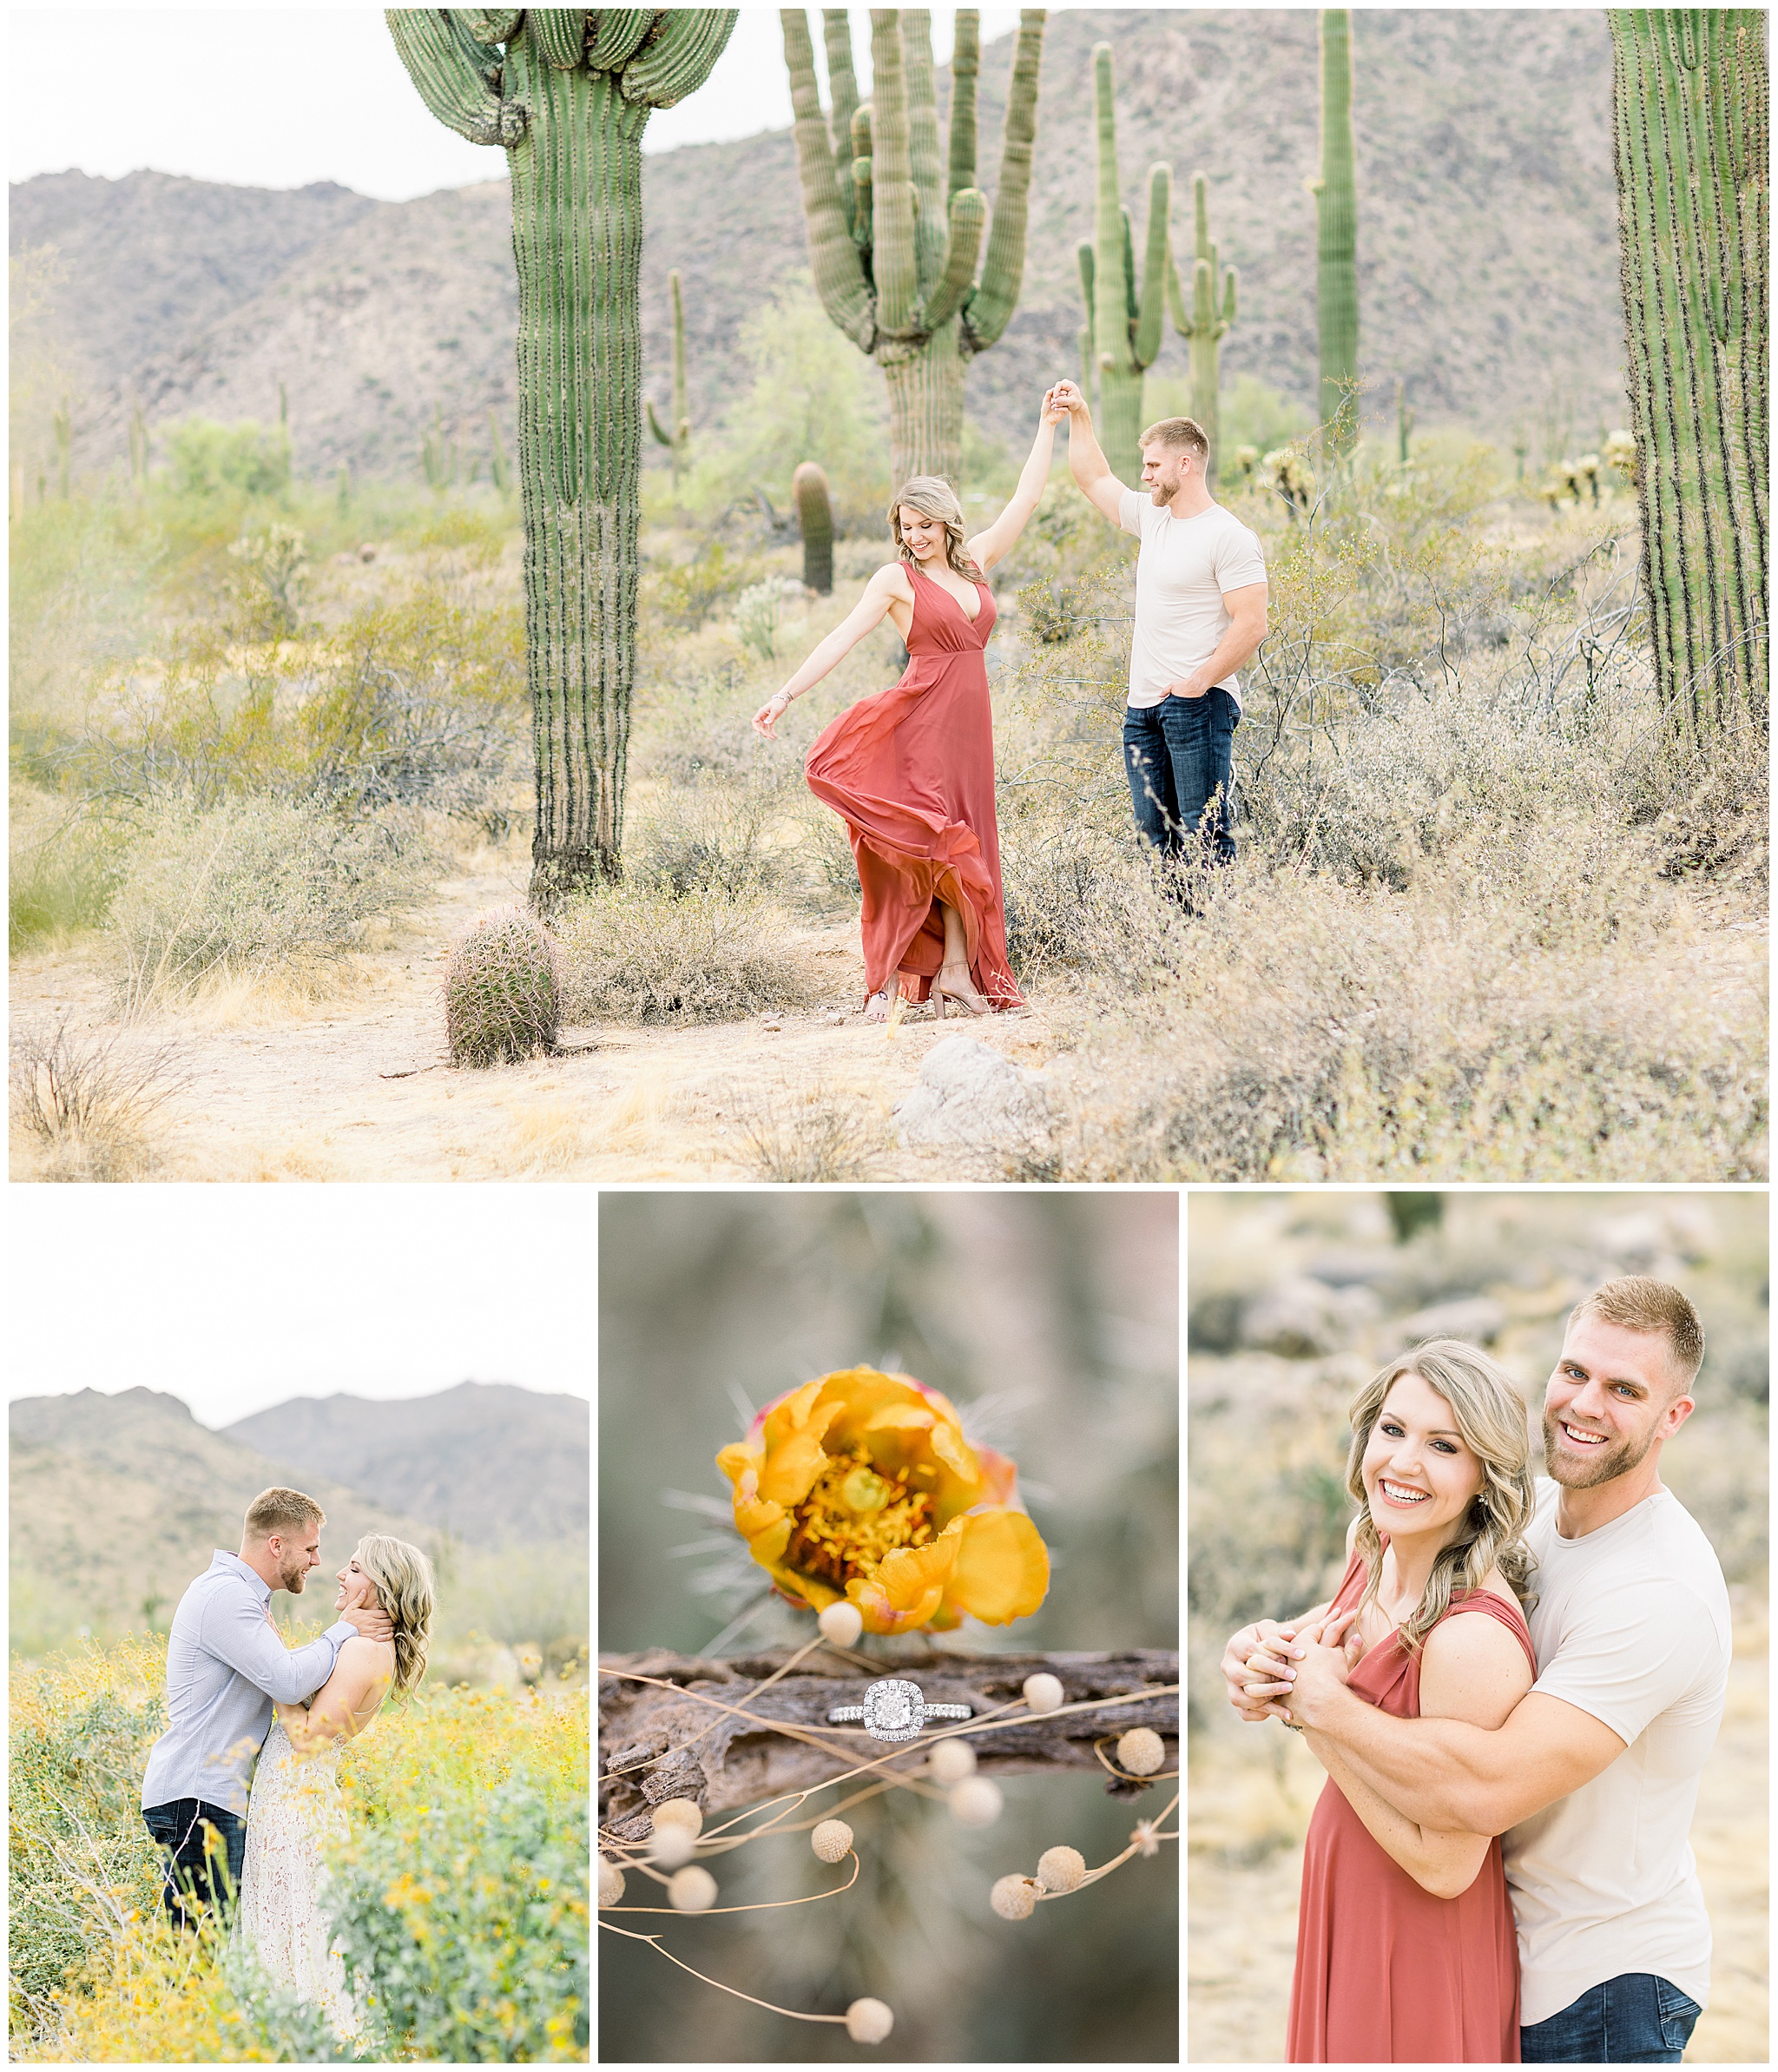 Desert Engagement Session, Lulus Dress, flower, ring, couple smiling at camera, couple dancing with cactus behind them